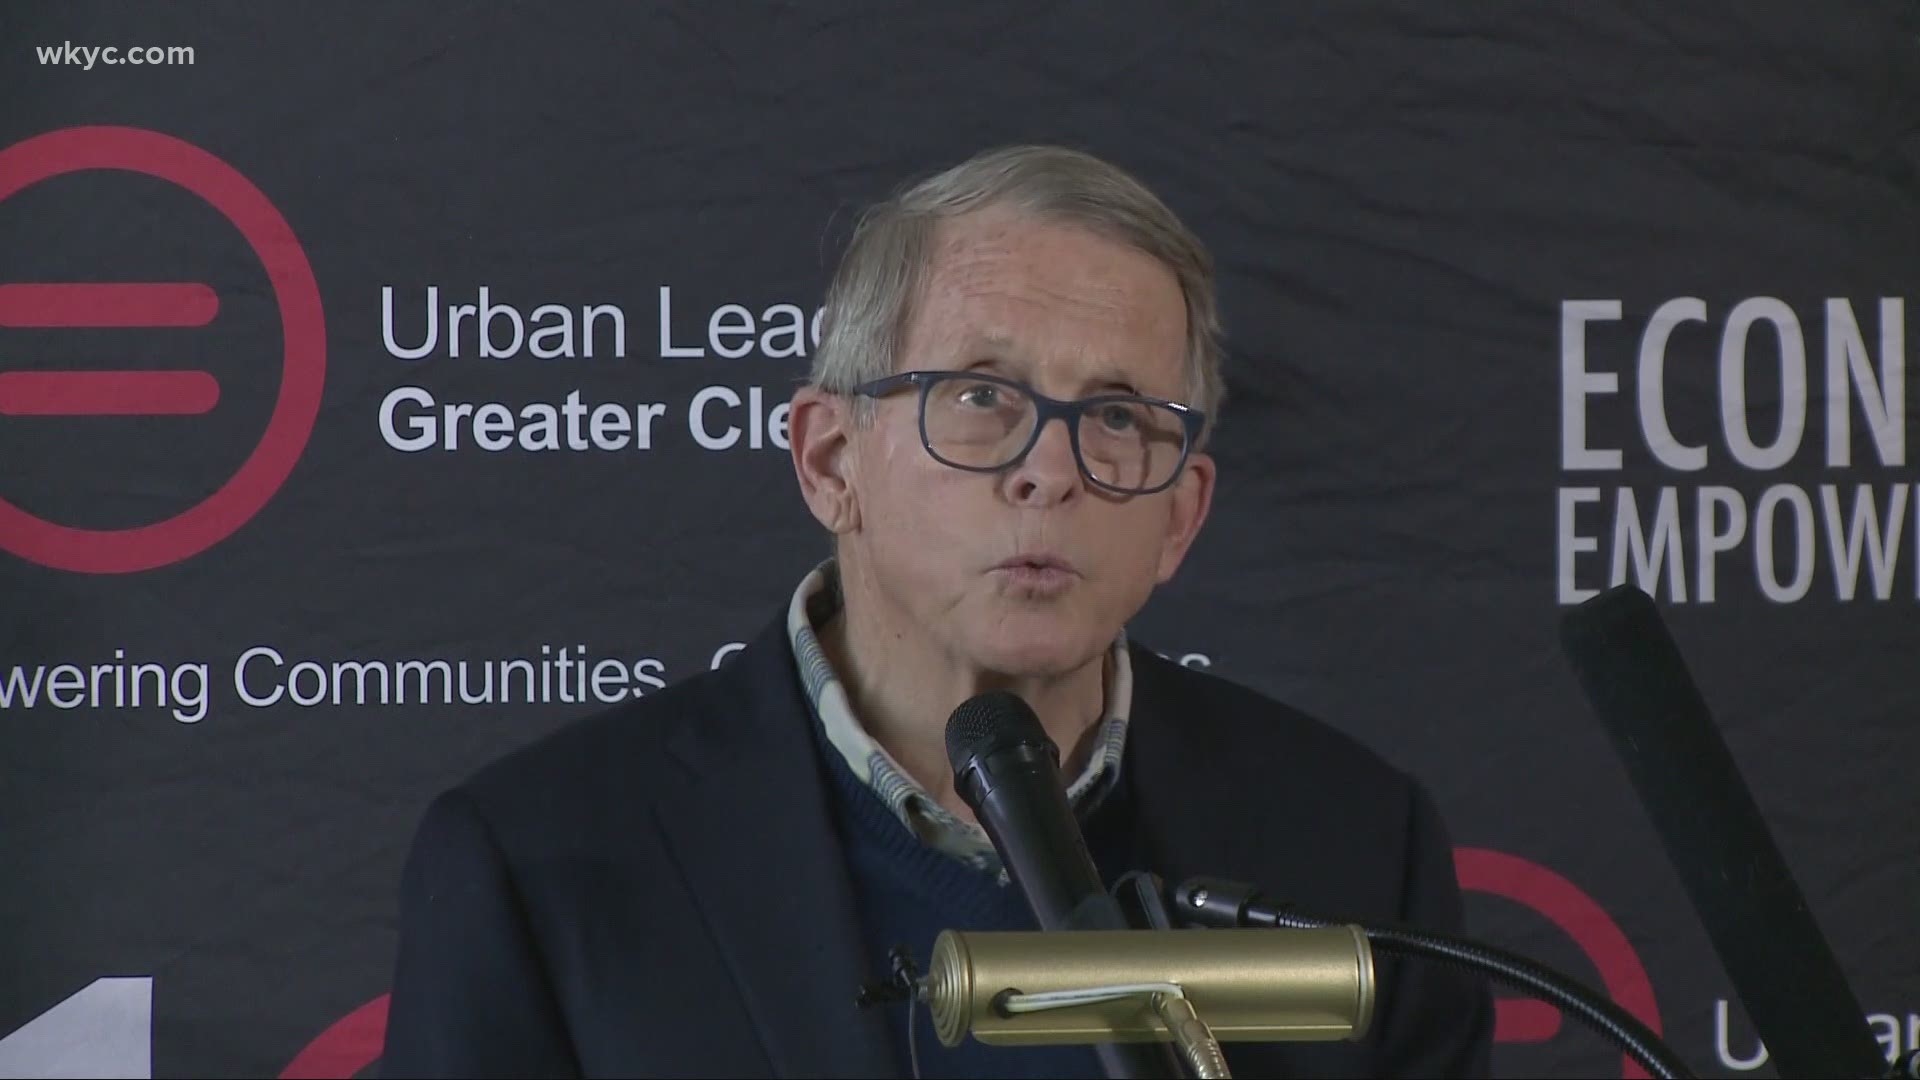 Ohio Governor Mike DeWine held a press conference in Cleveland on Sunday. DeWine revealed additional plans and details ahead of the site's opening on Tuesday.